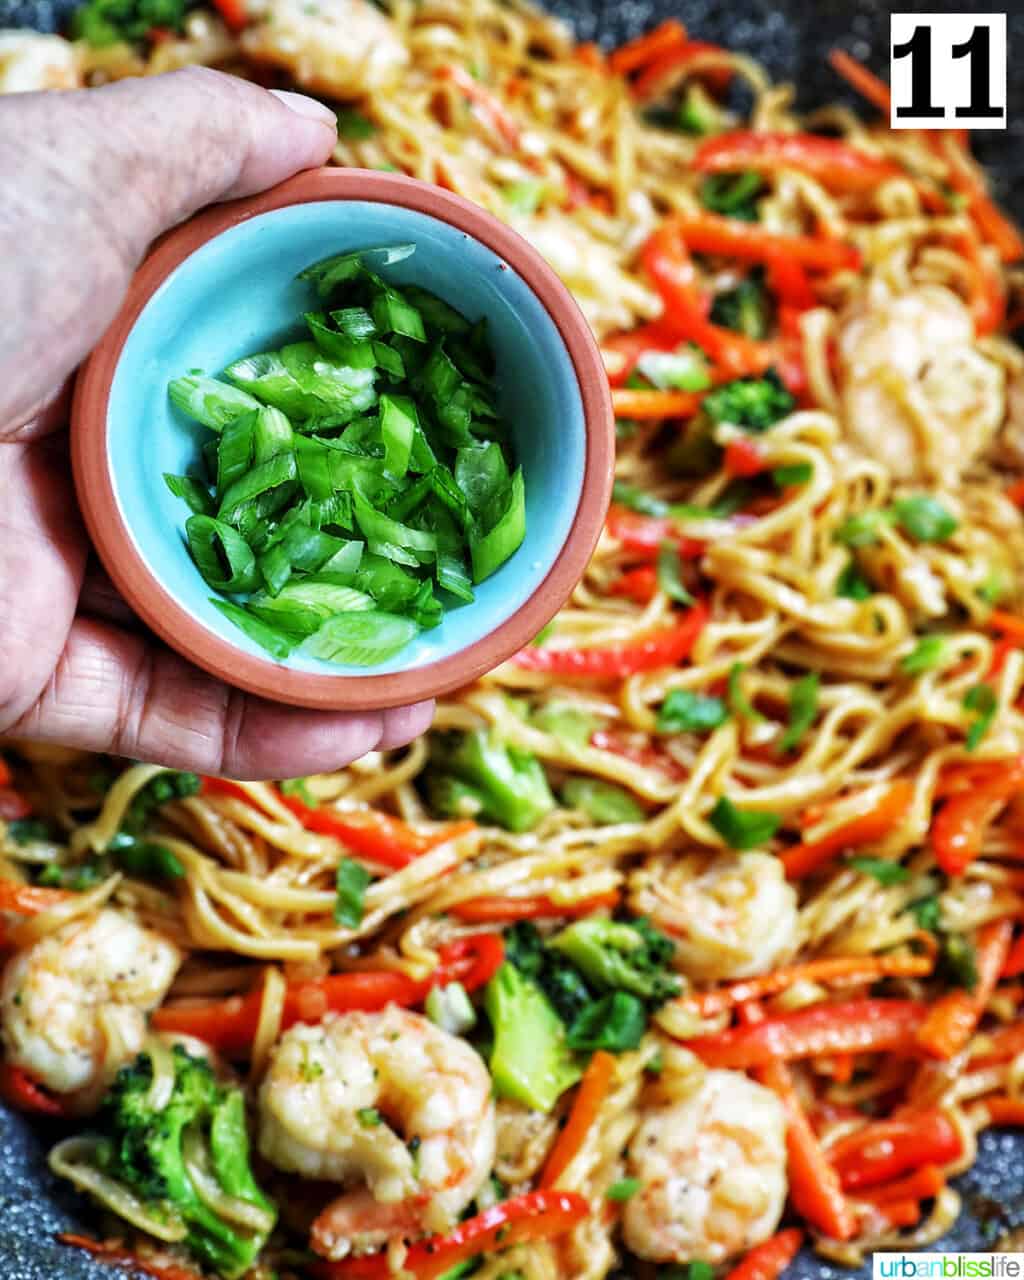 hand holding a bowl of chopped green onions over a wok of bowl of prawn chow mein noodles.